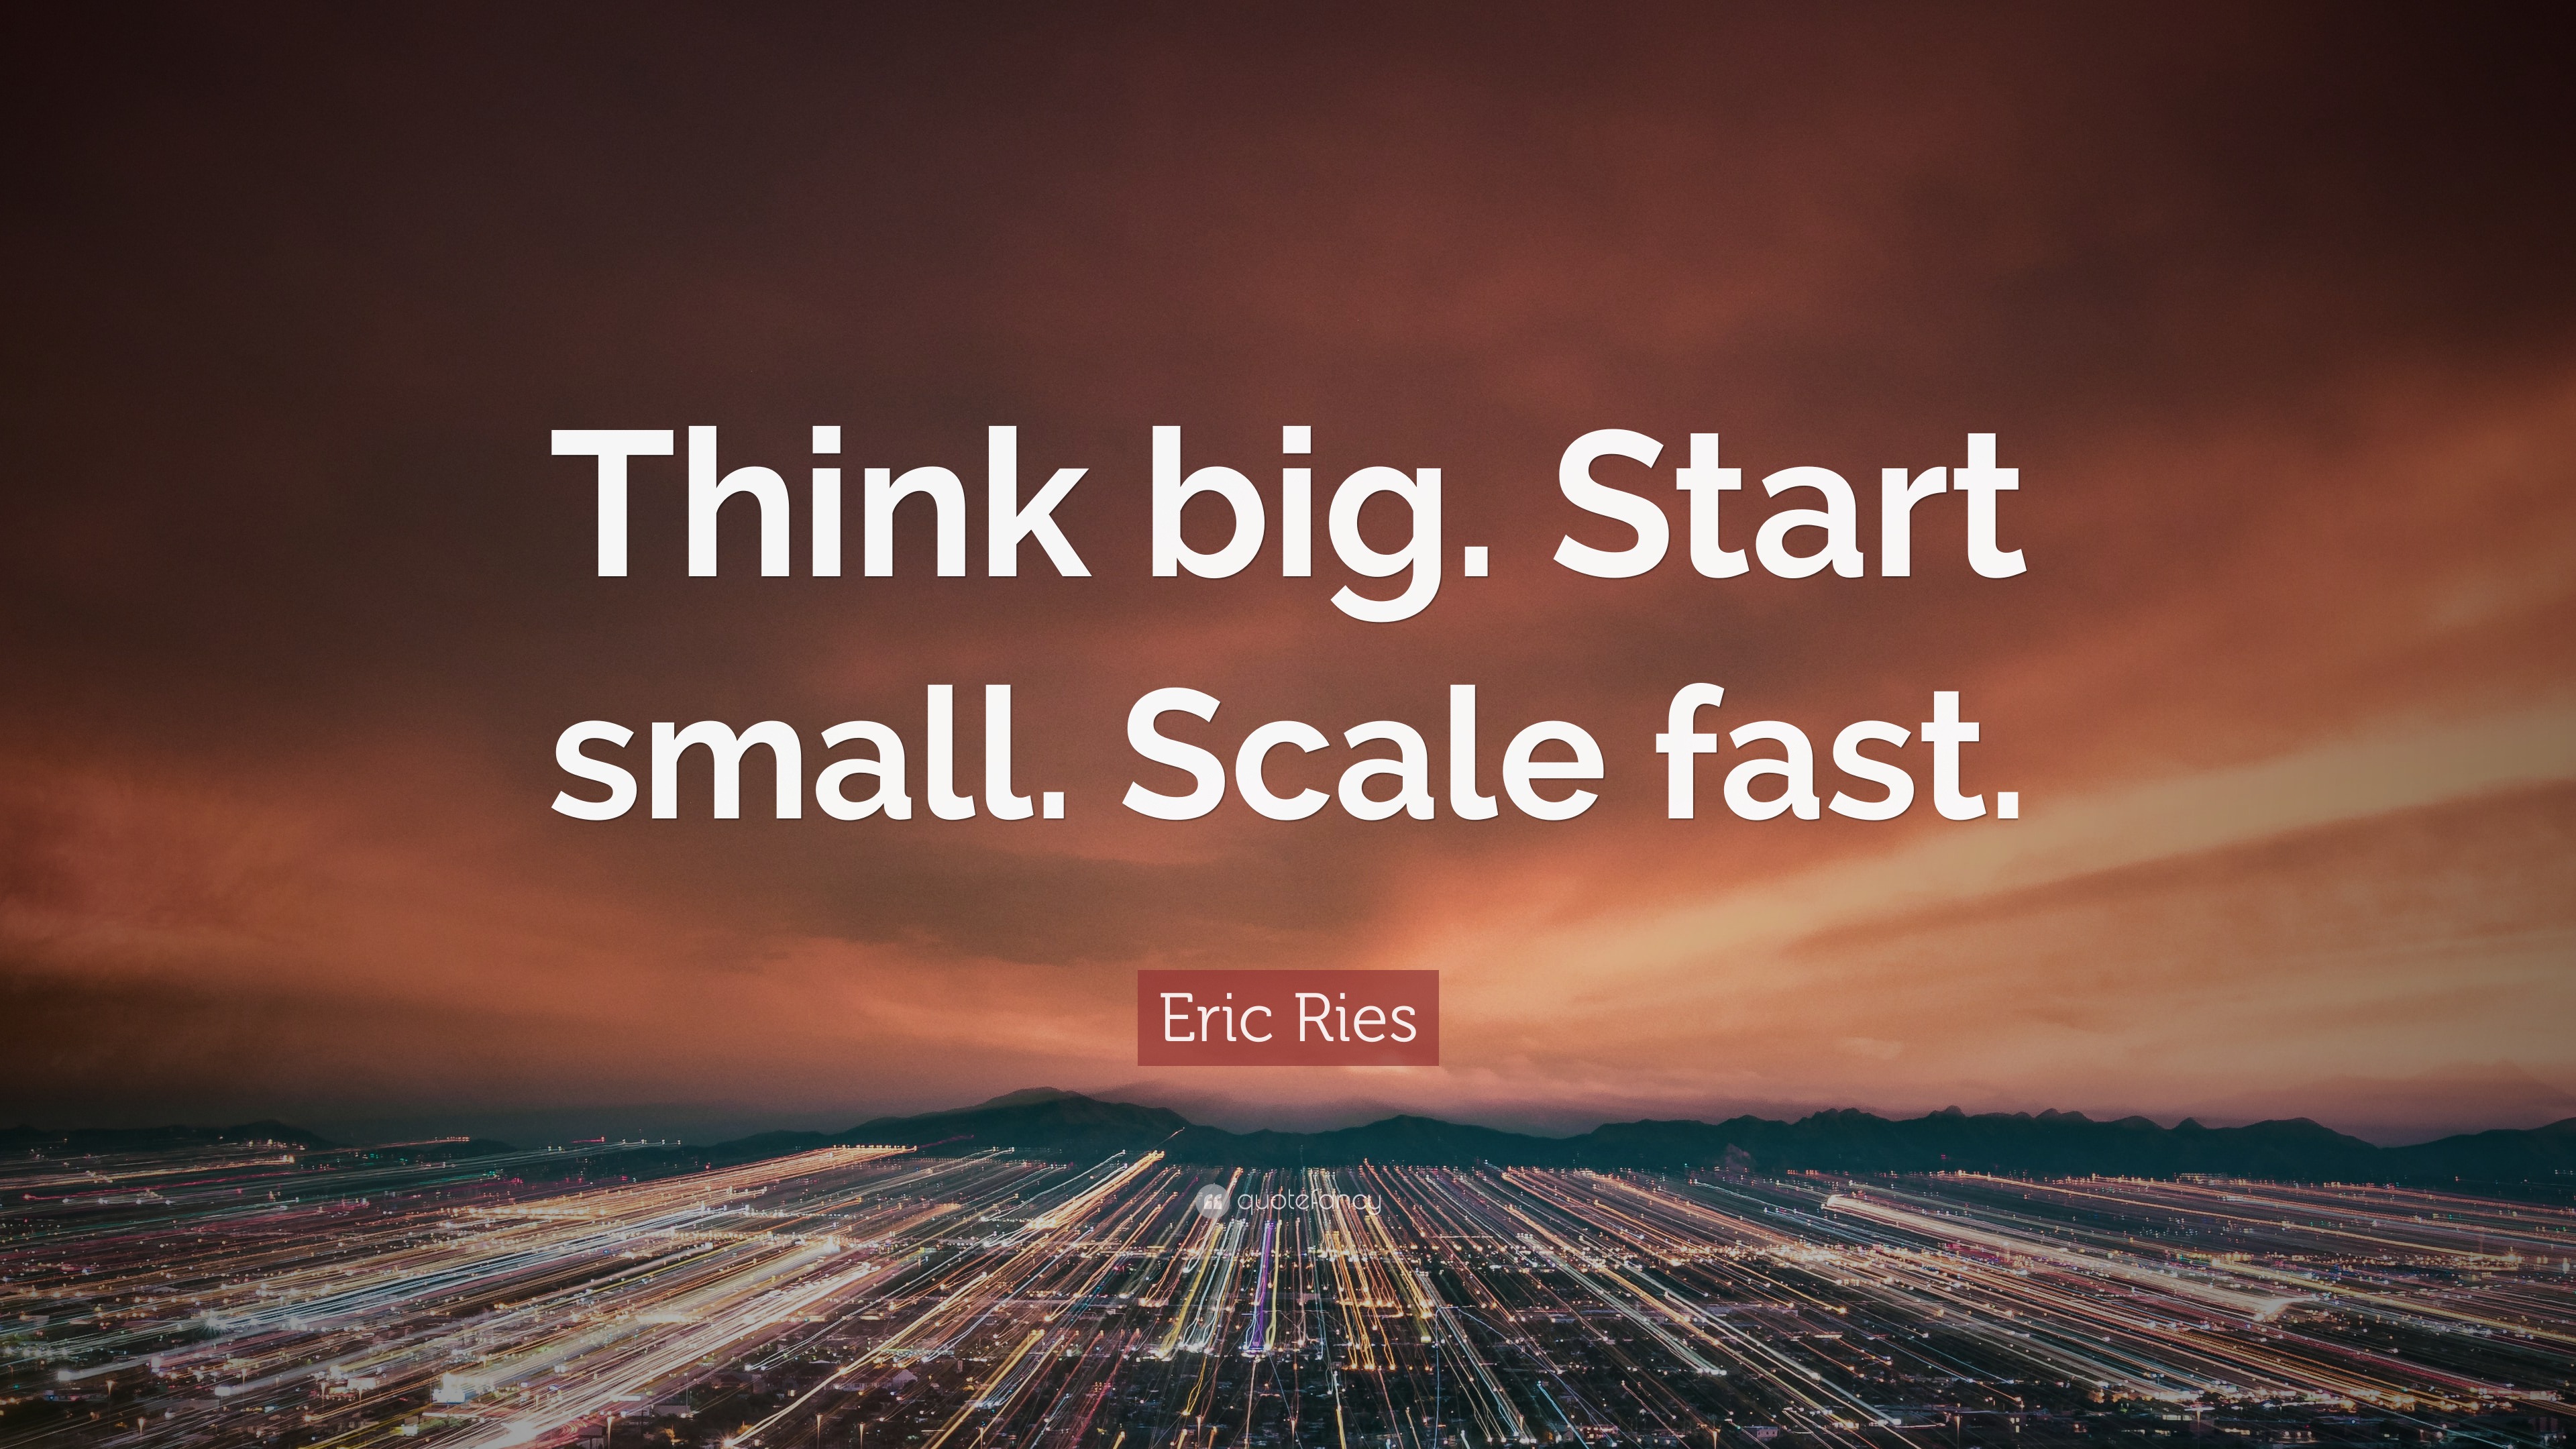 https://quotefancy.com/media/wallpaper/3840x2160/6907633-Eric-Ries-Quote-Think-big-Start-small-Scale-fast.jpg